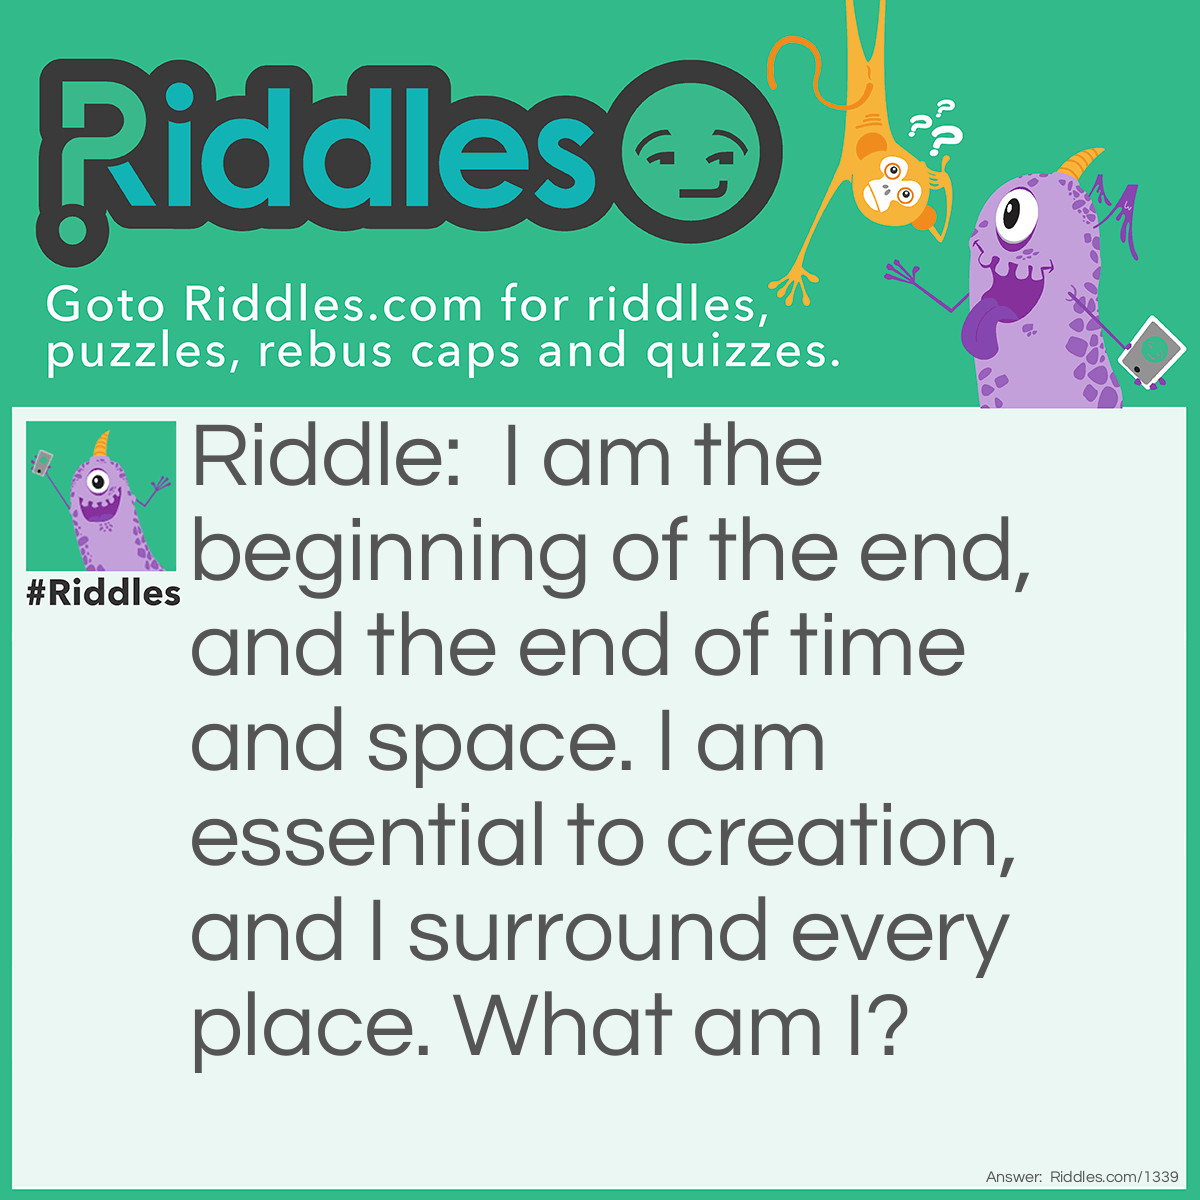 Riddle: I am the beginning of the end, and the end of time and space. I am essential to creation, and I surround every place.
What am I? Answer: The letter E. End, timE, spacE, Every placE